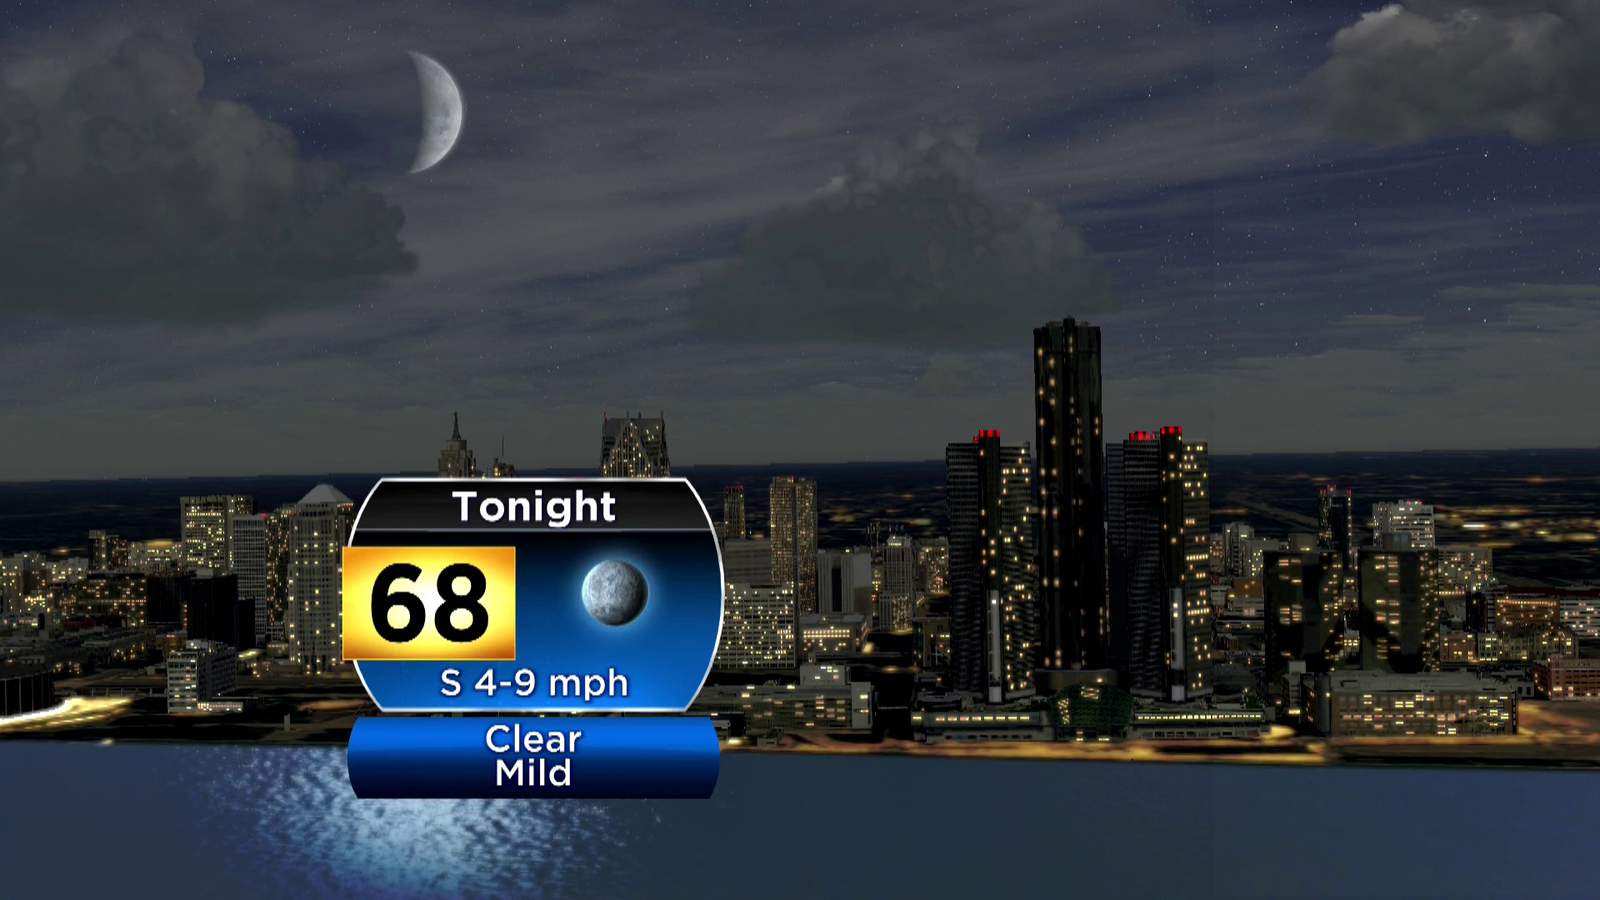 Metro Detroit weather: Mild Saturday night with mostly clear skies